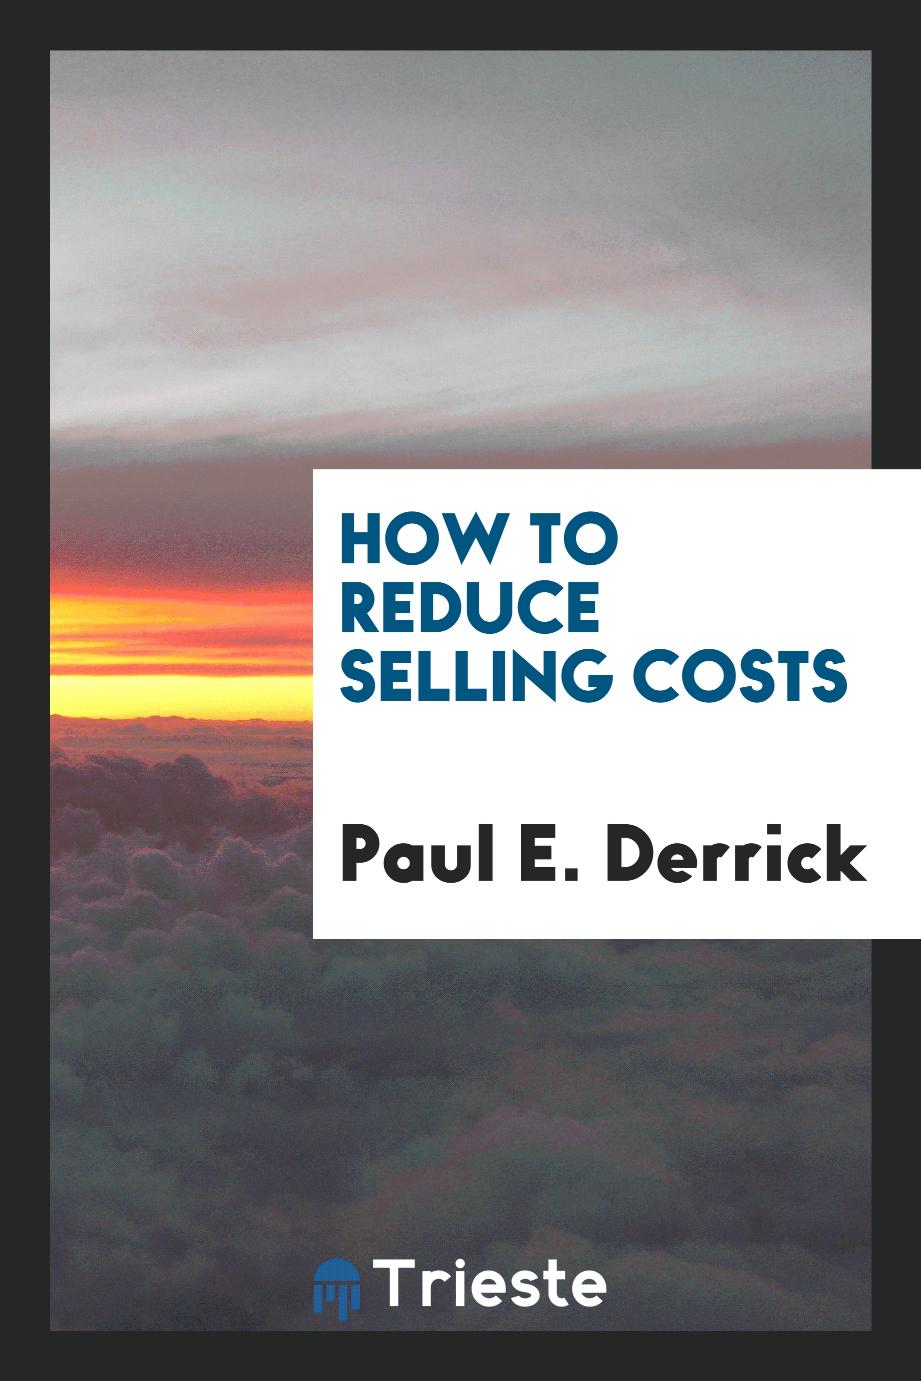 How to reduce selling costs